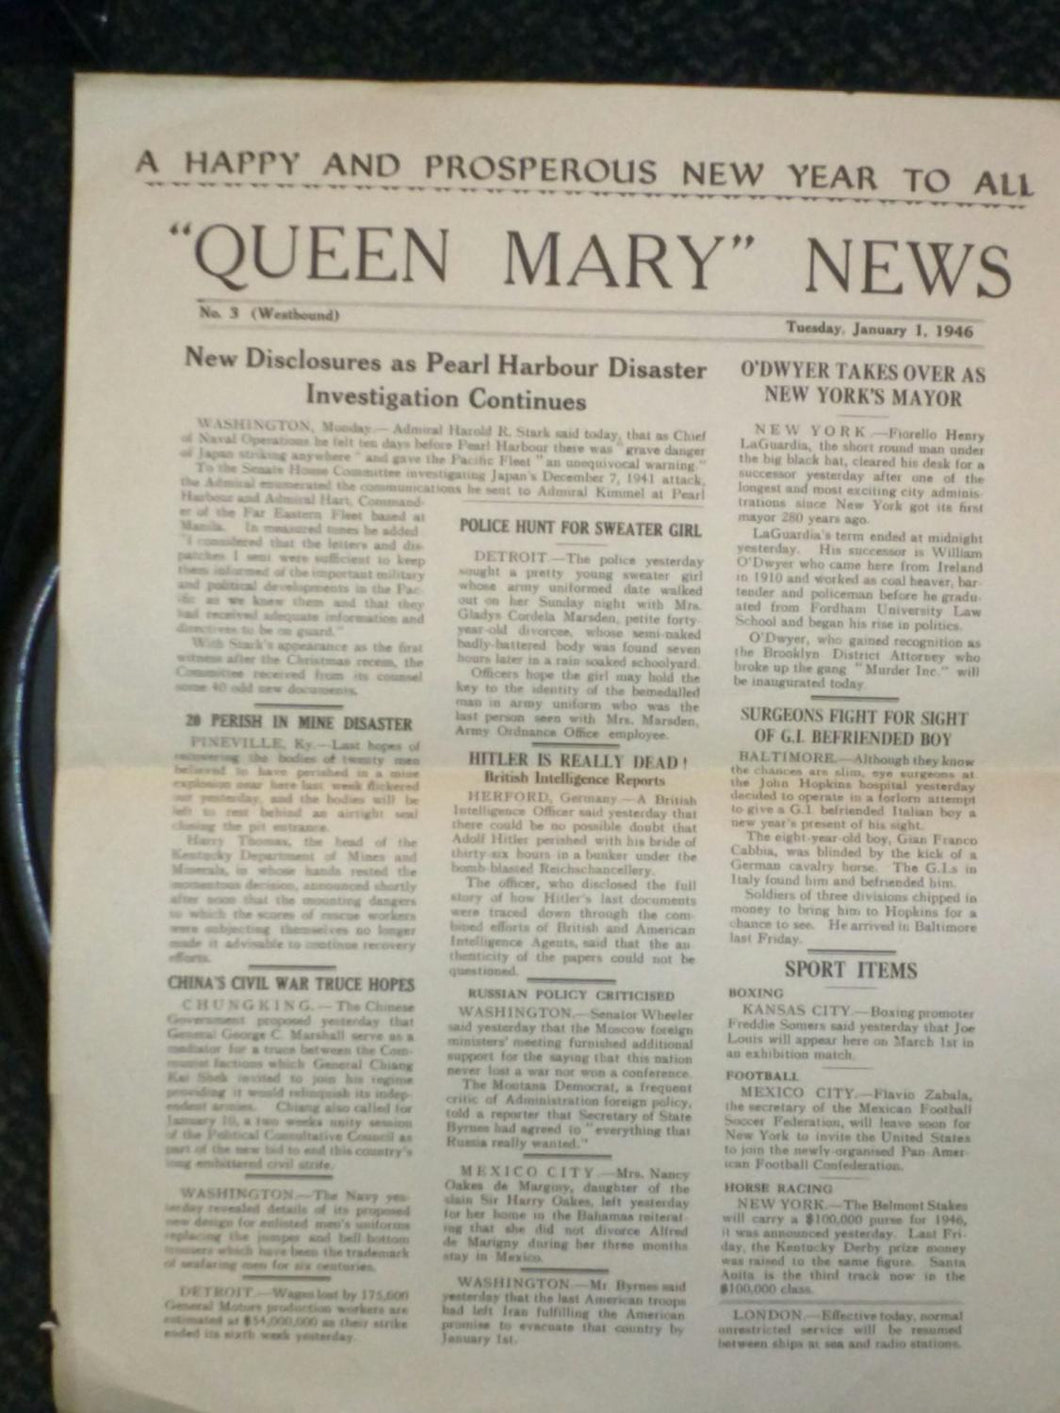 Queen Mary News